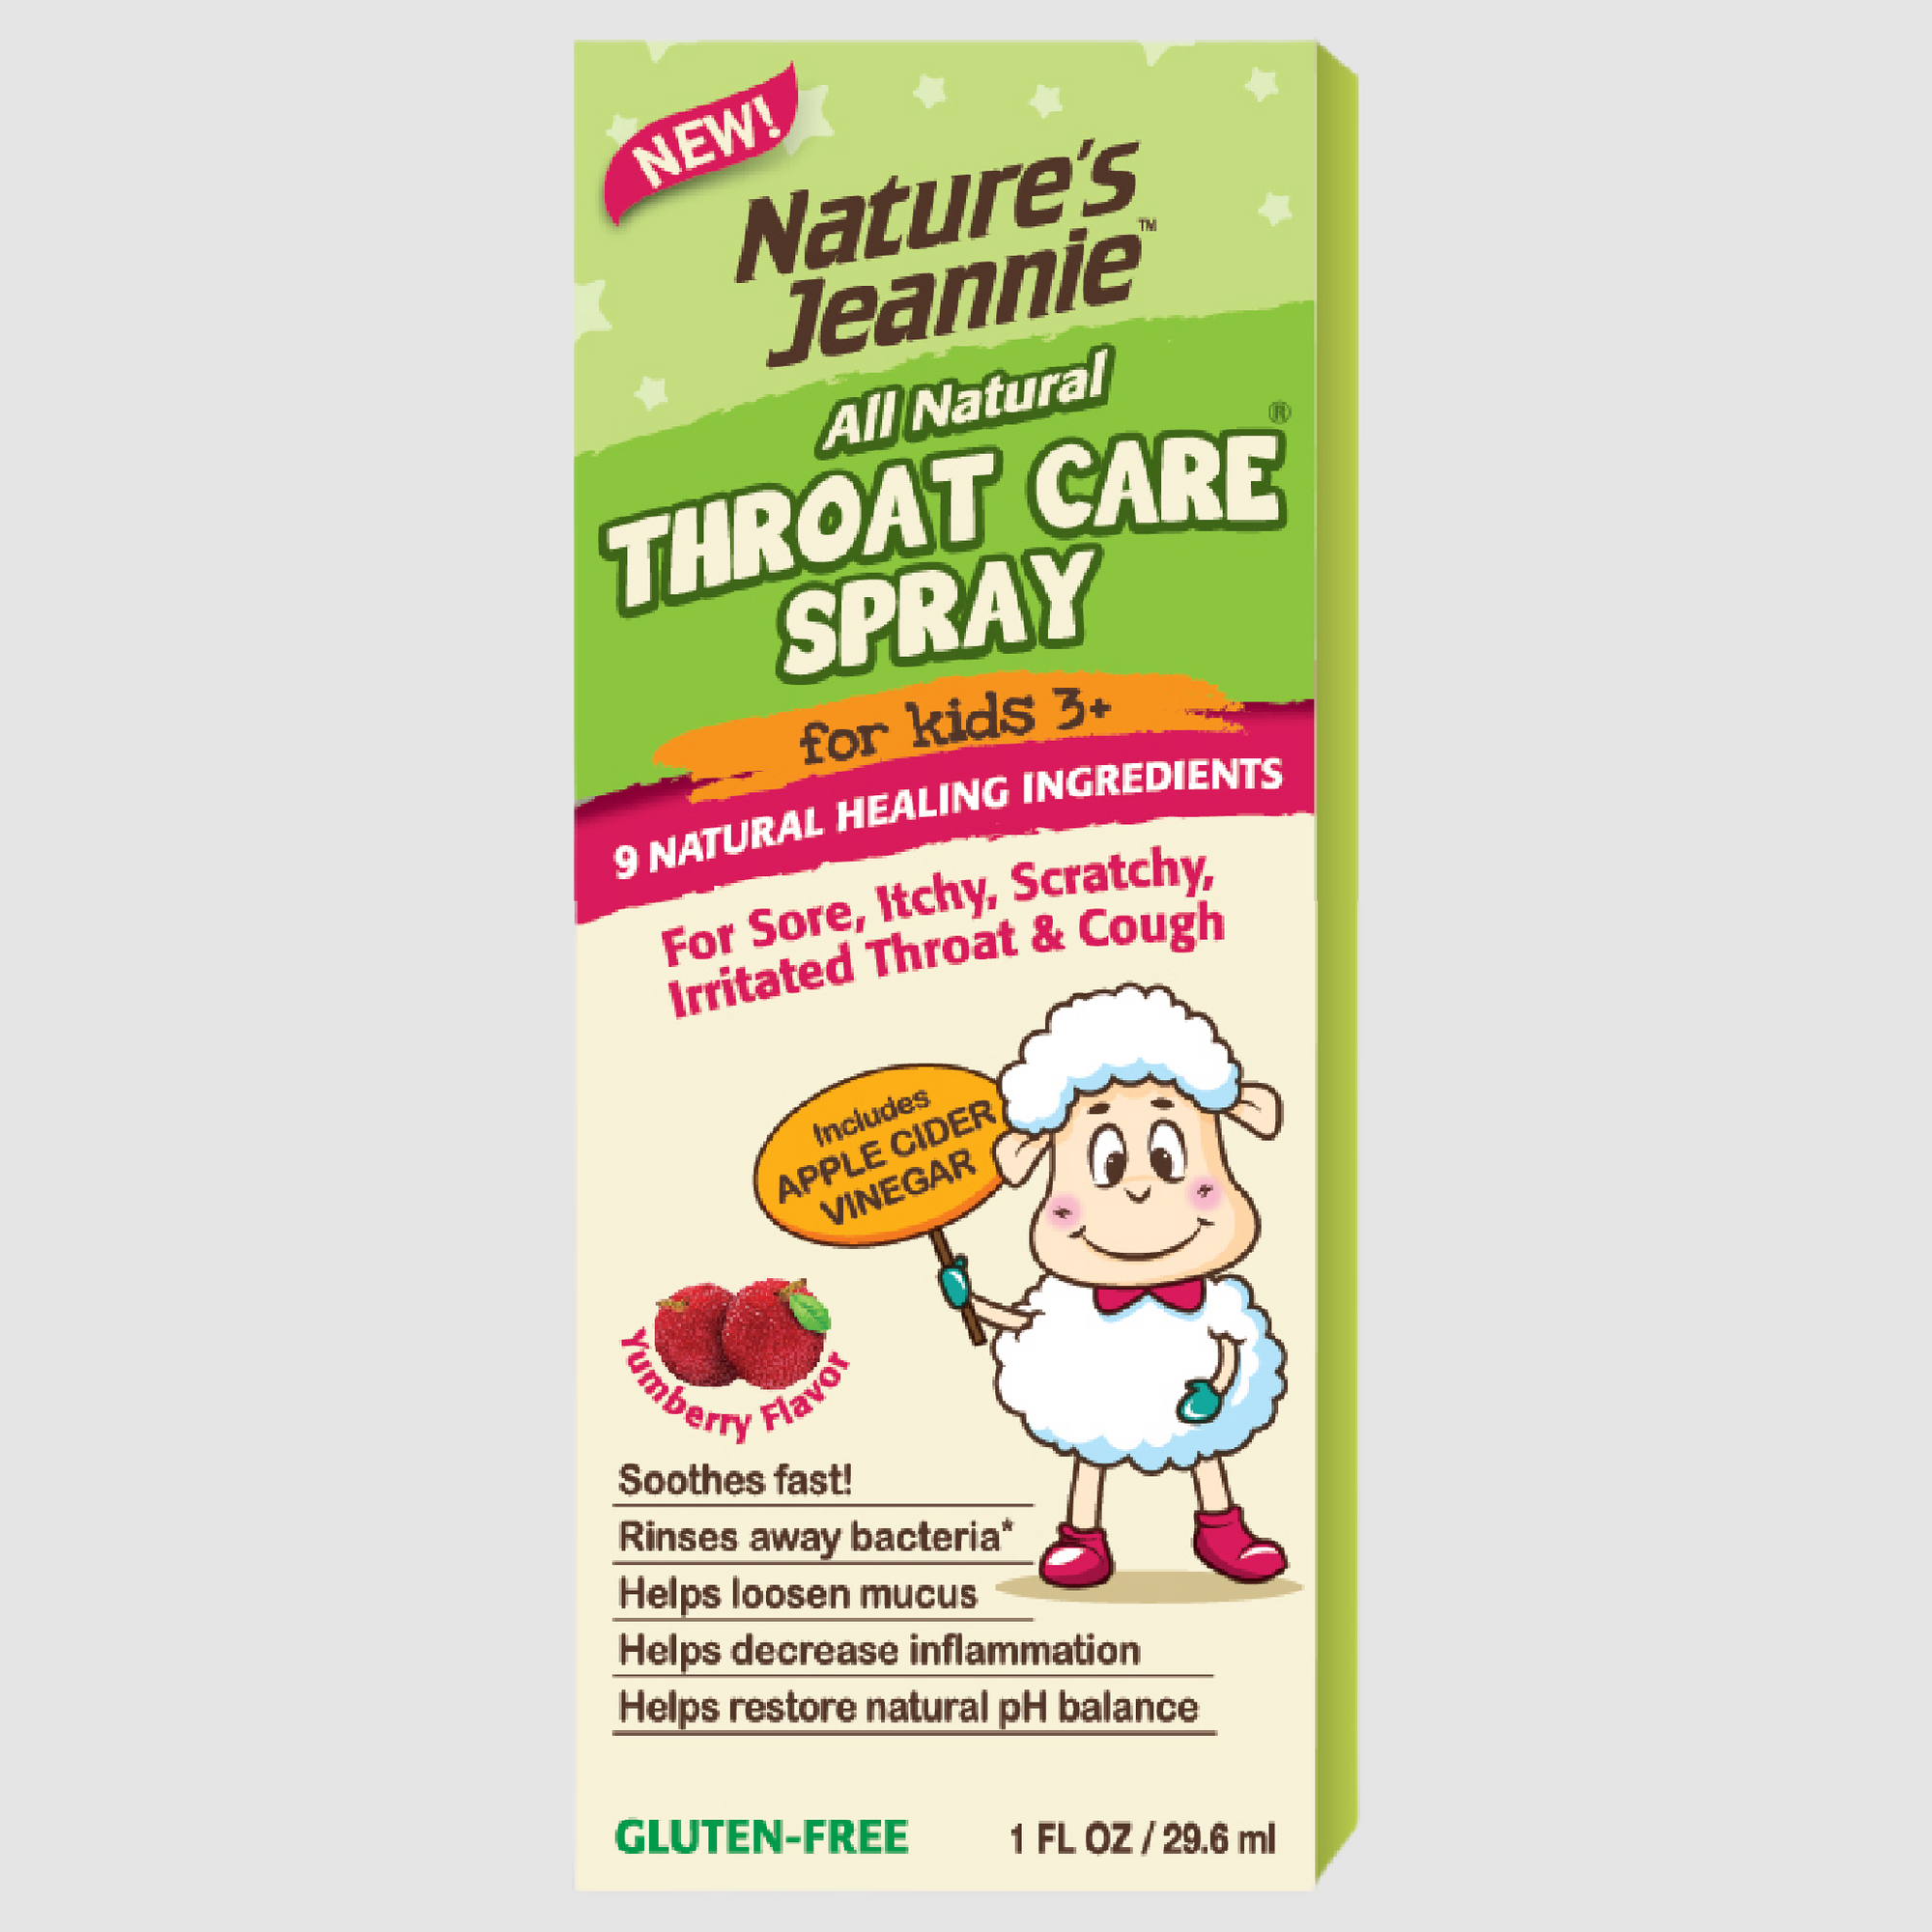 Nature's Jeannie Throat Care Spray for Kid's 3+ product package.